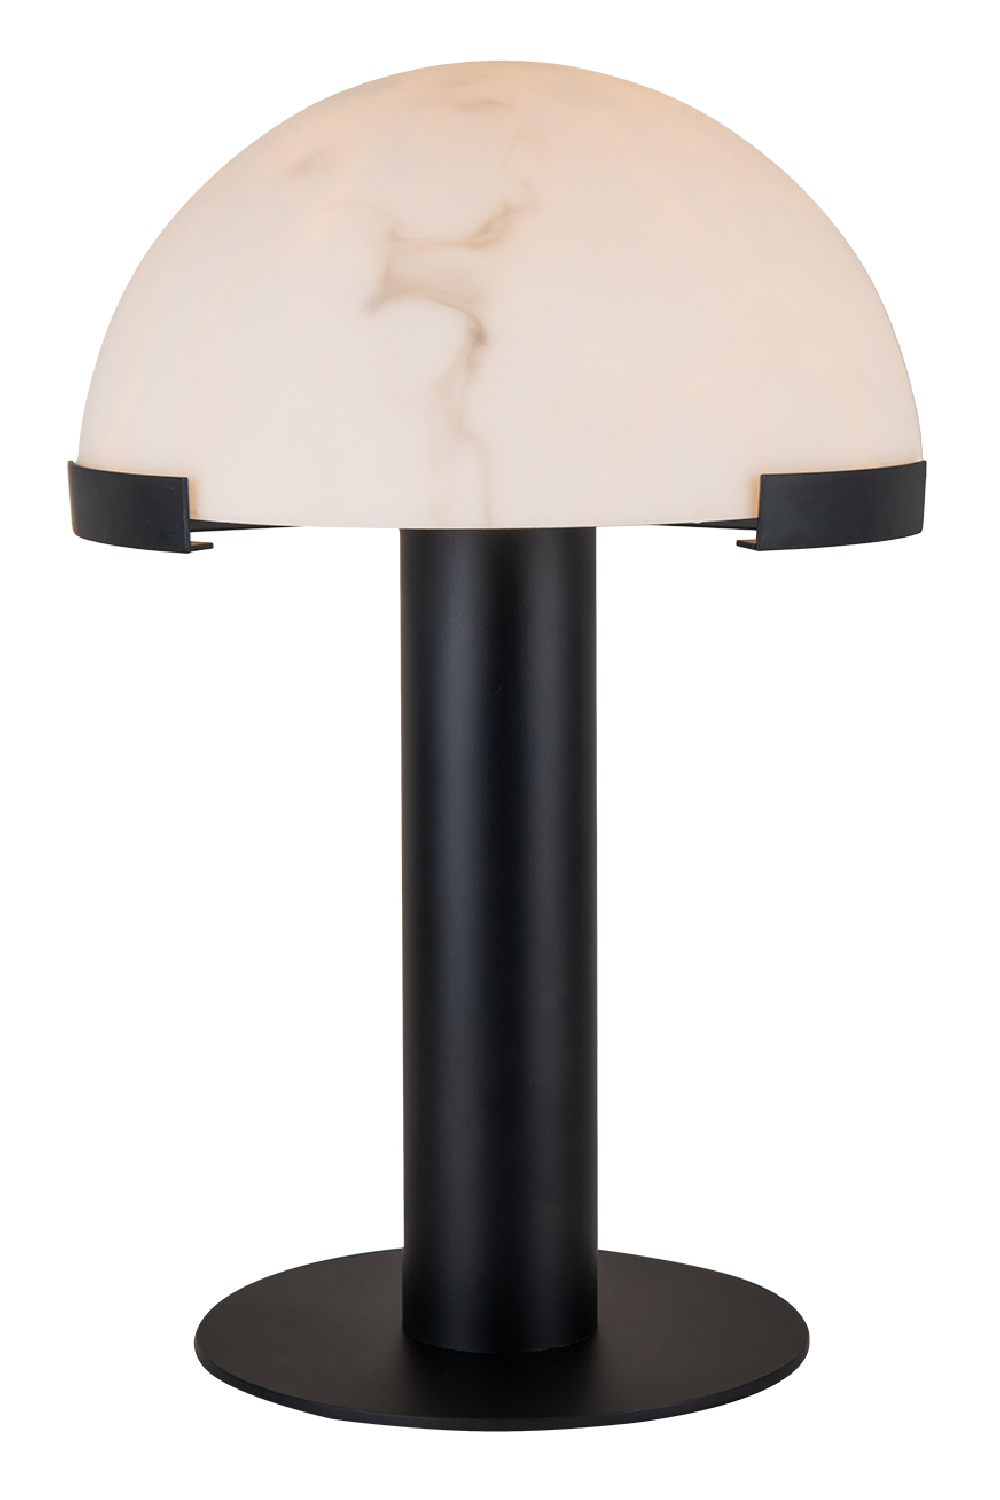 Image of Black White Dome Table Lamp | Liang & Eimil Holmes